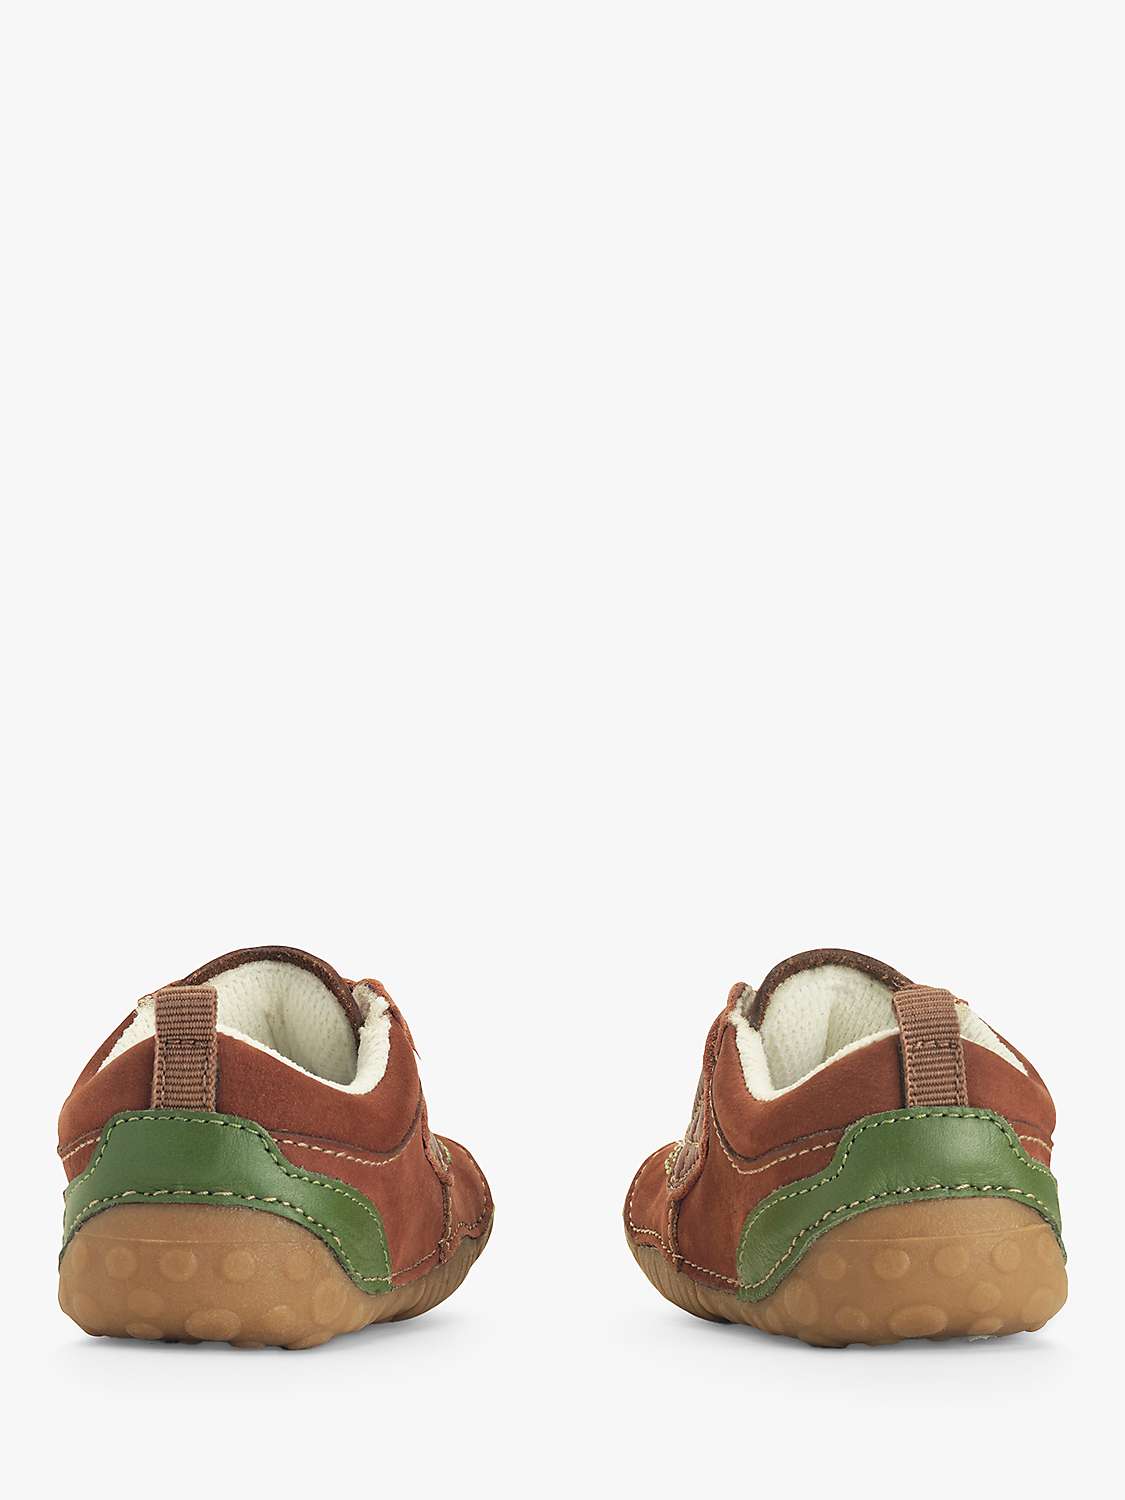 Buy Start-Rite Baby Shuffle Pre-Walker Leather Shoes Online at johnlewis.com